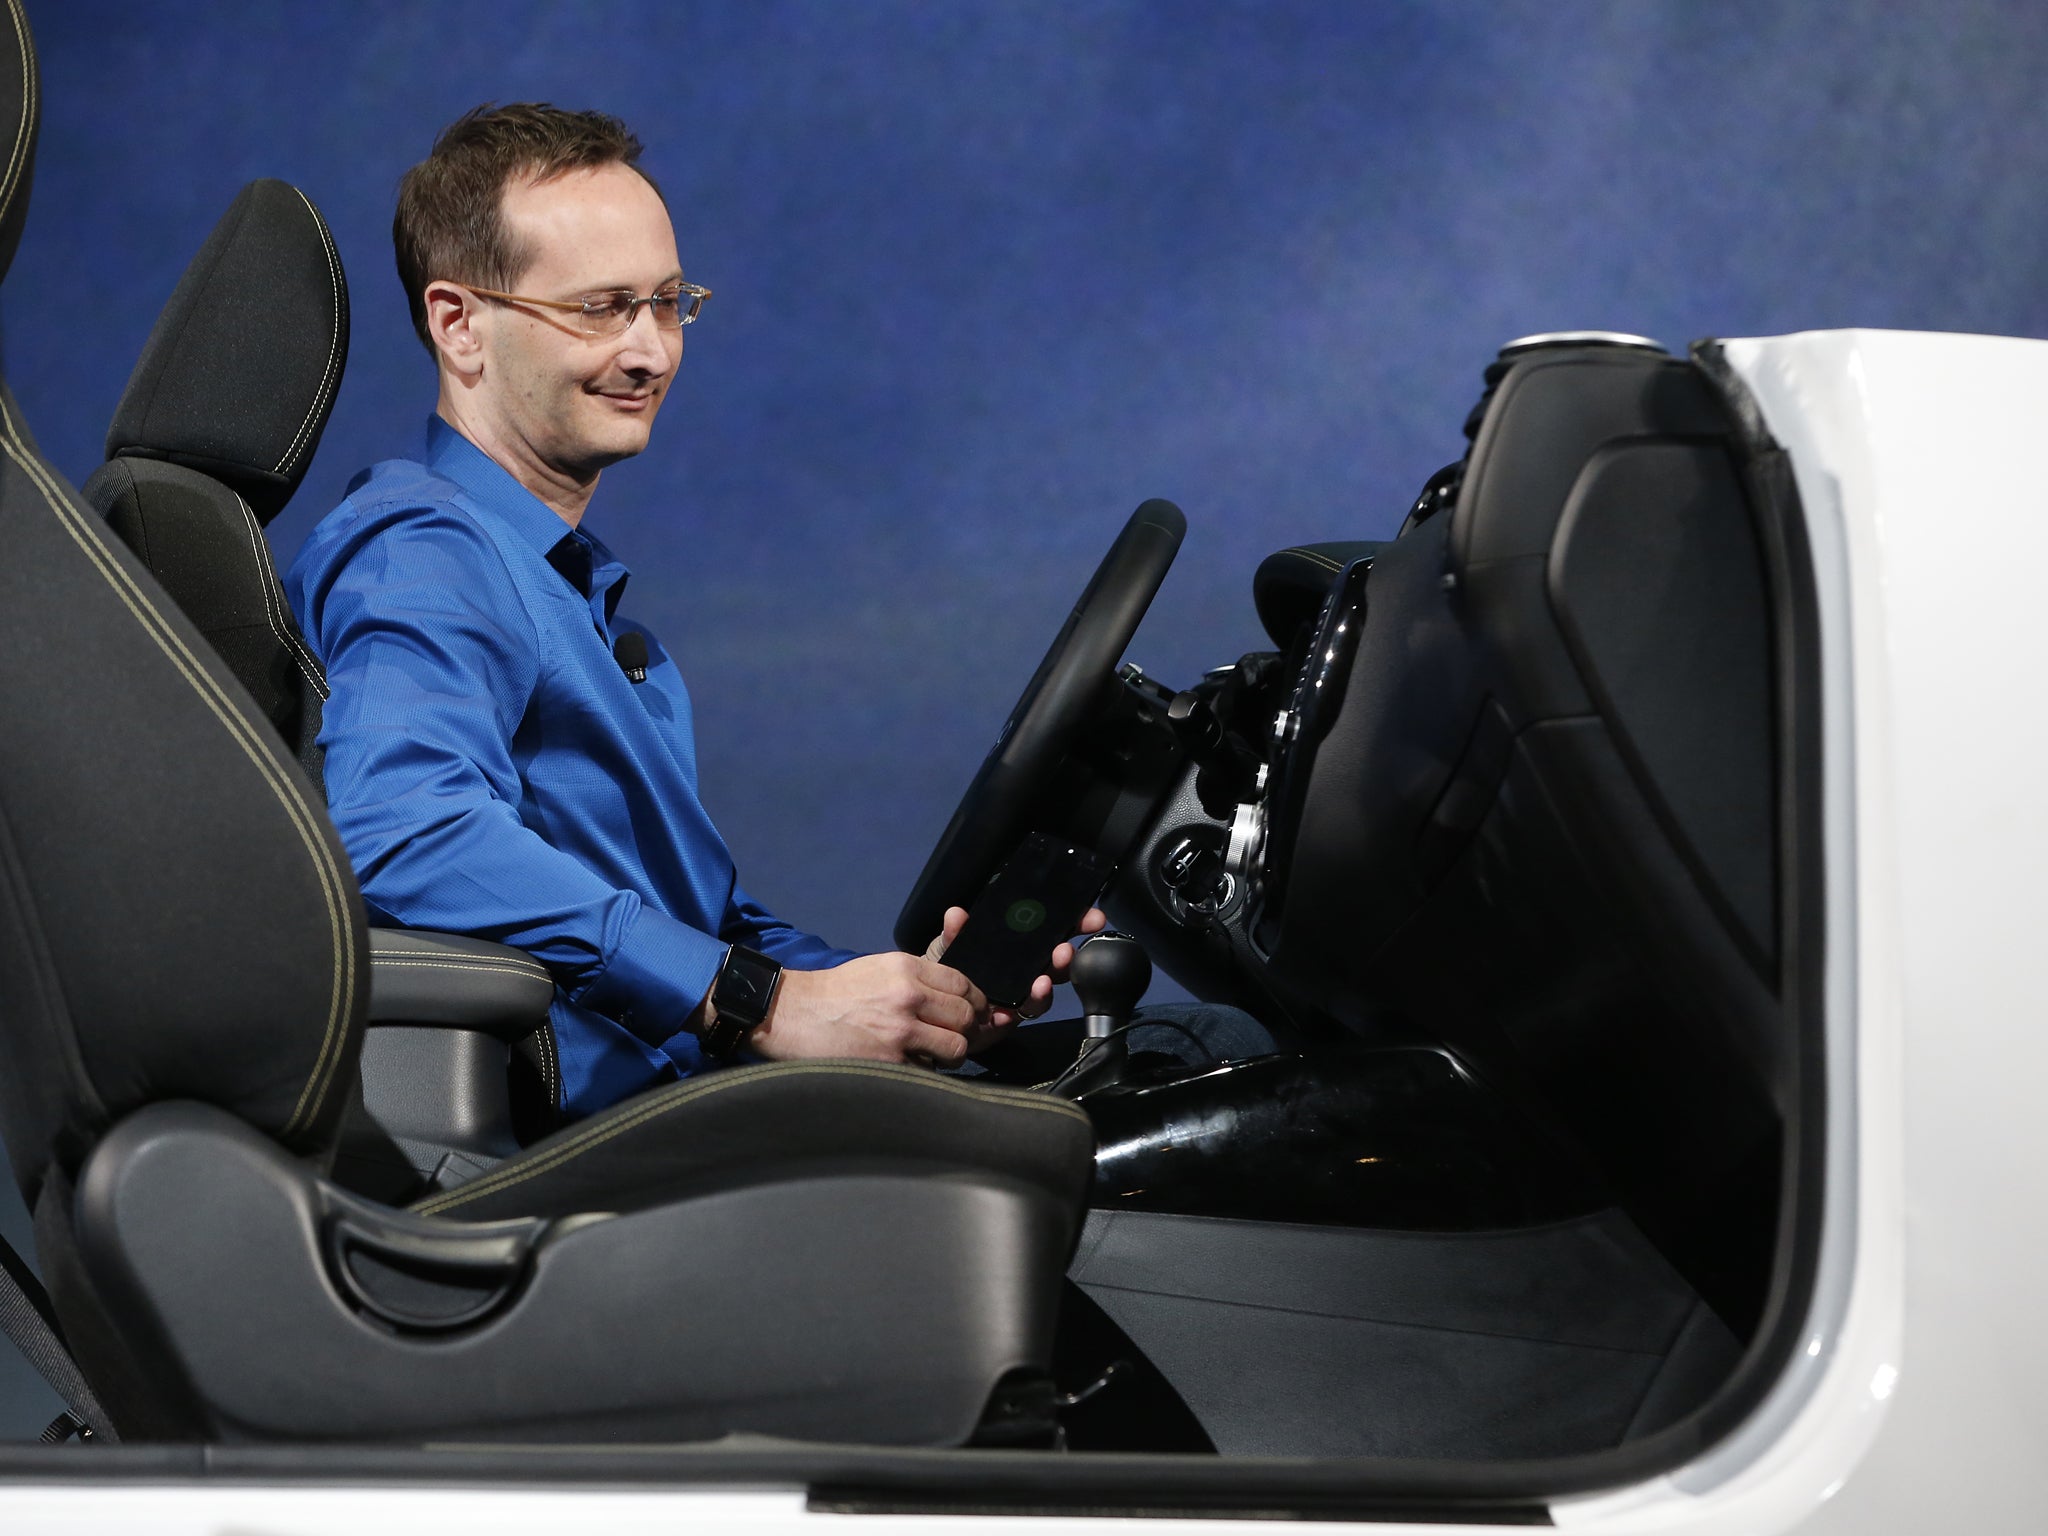 A presenter demonstrates Android Auto on stage during the Google I/O Developers Conference at Moscone Center on June 25, 2014 in San Francisco, California.